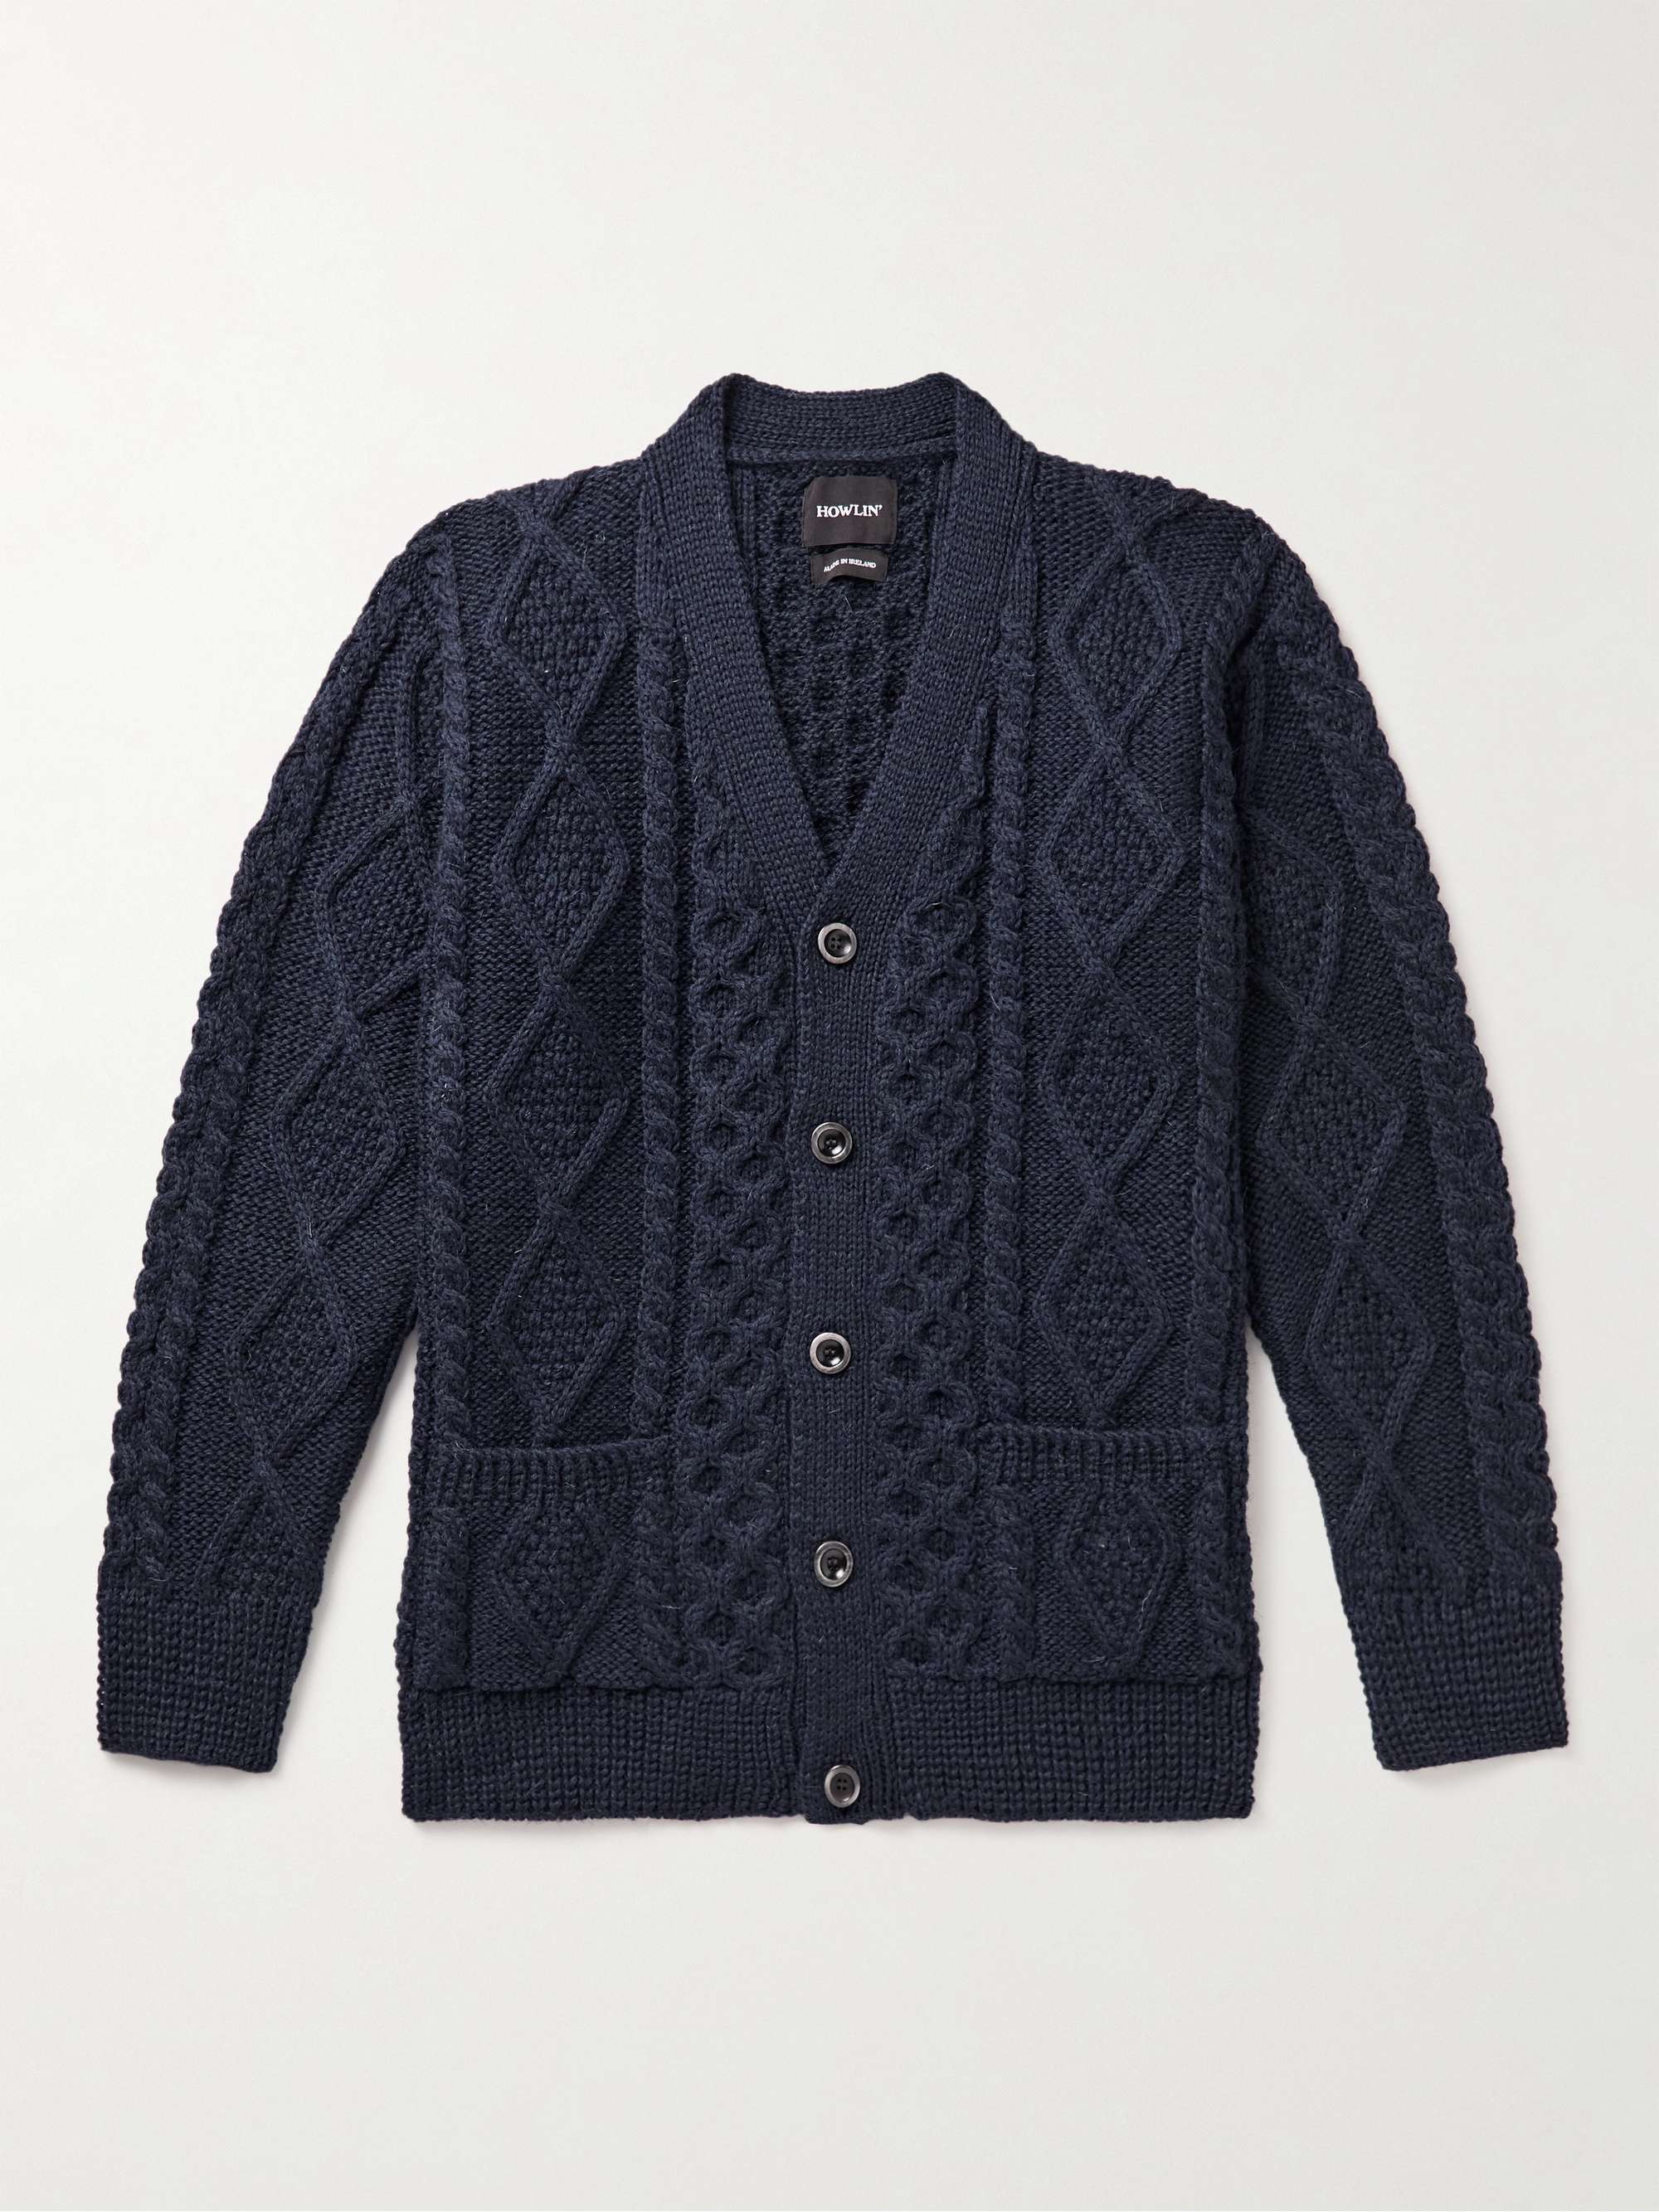 HOWLIN Blind Flowers Cable-Knit Wool Cardigan,Navy